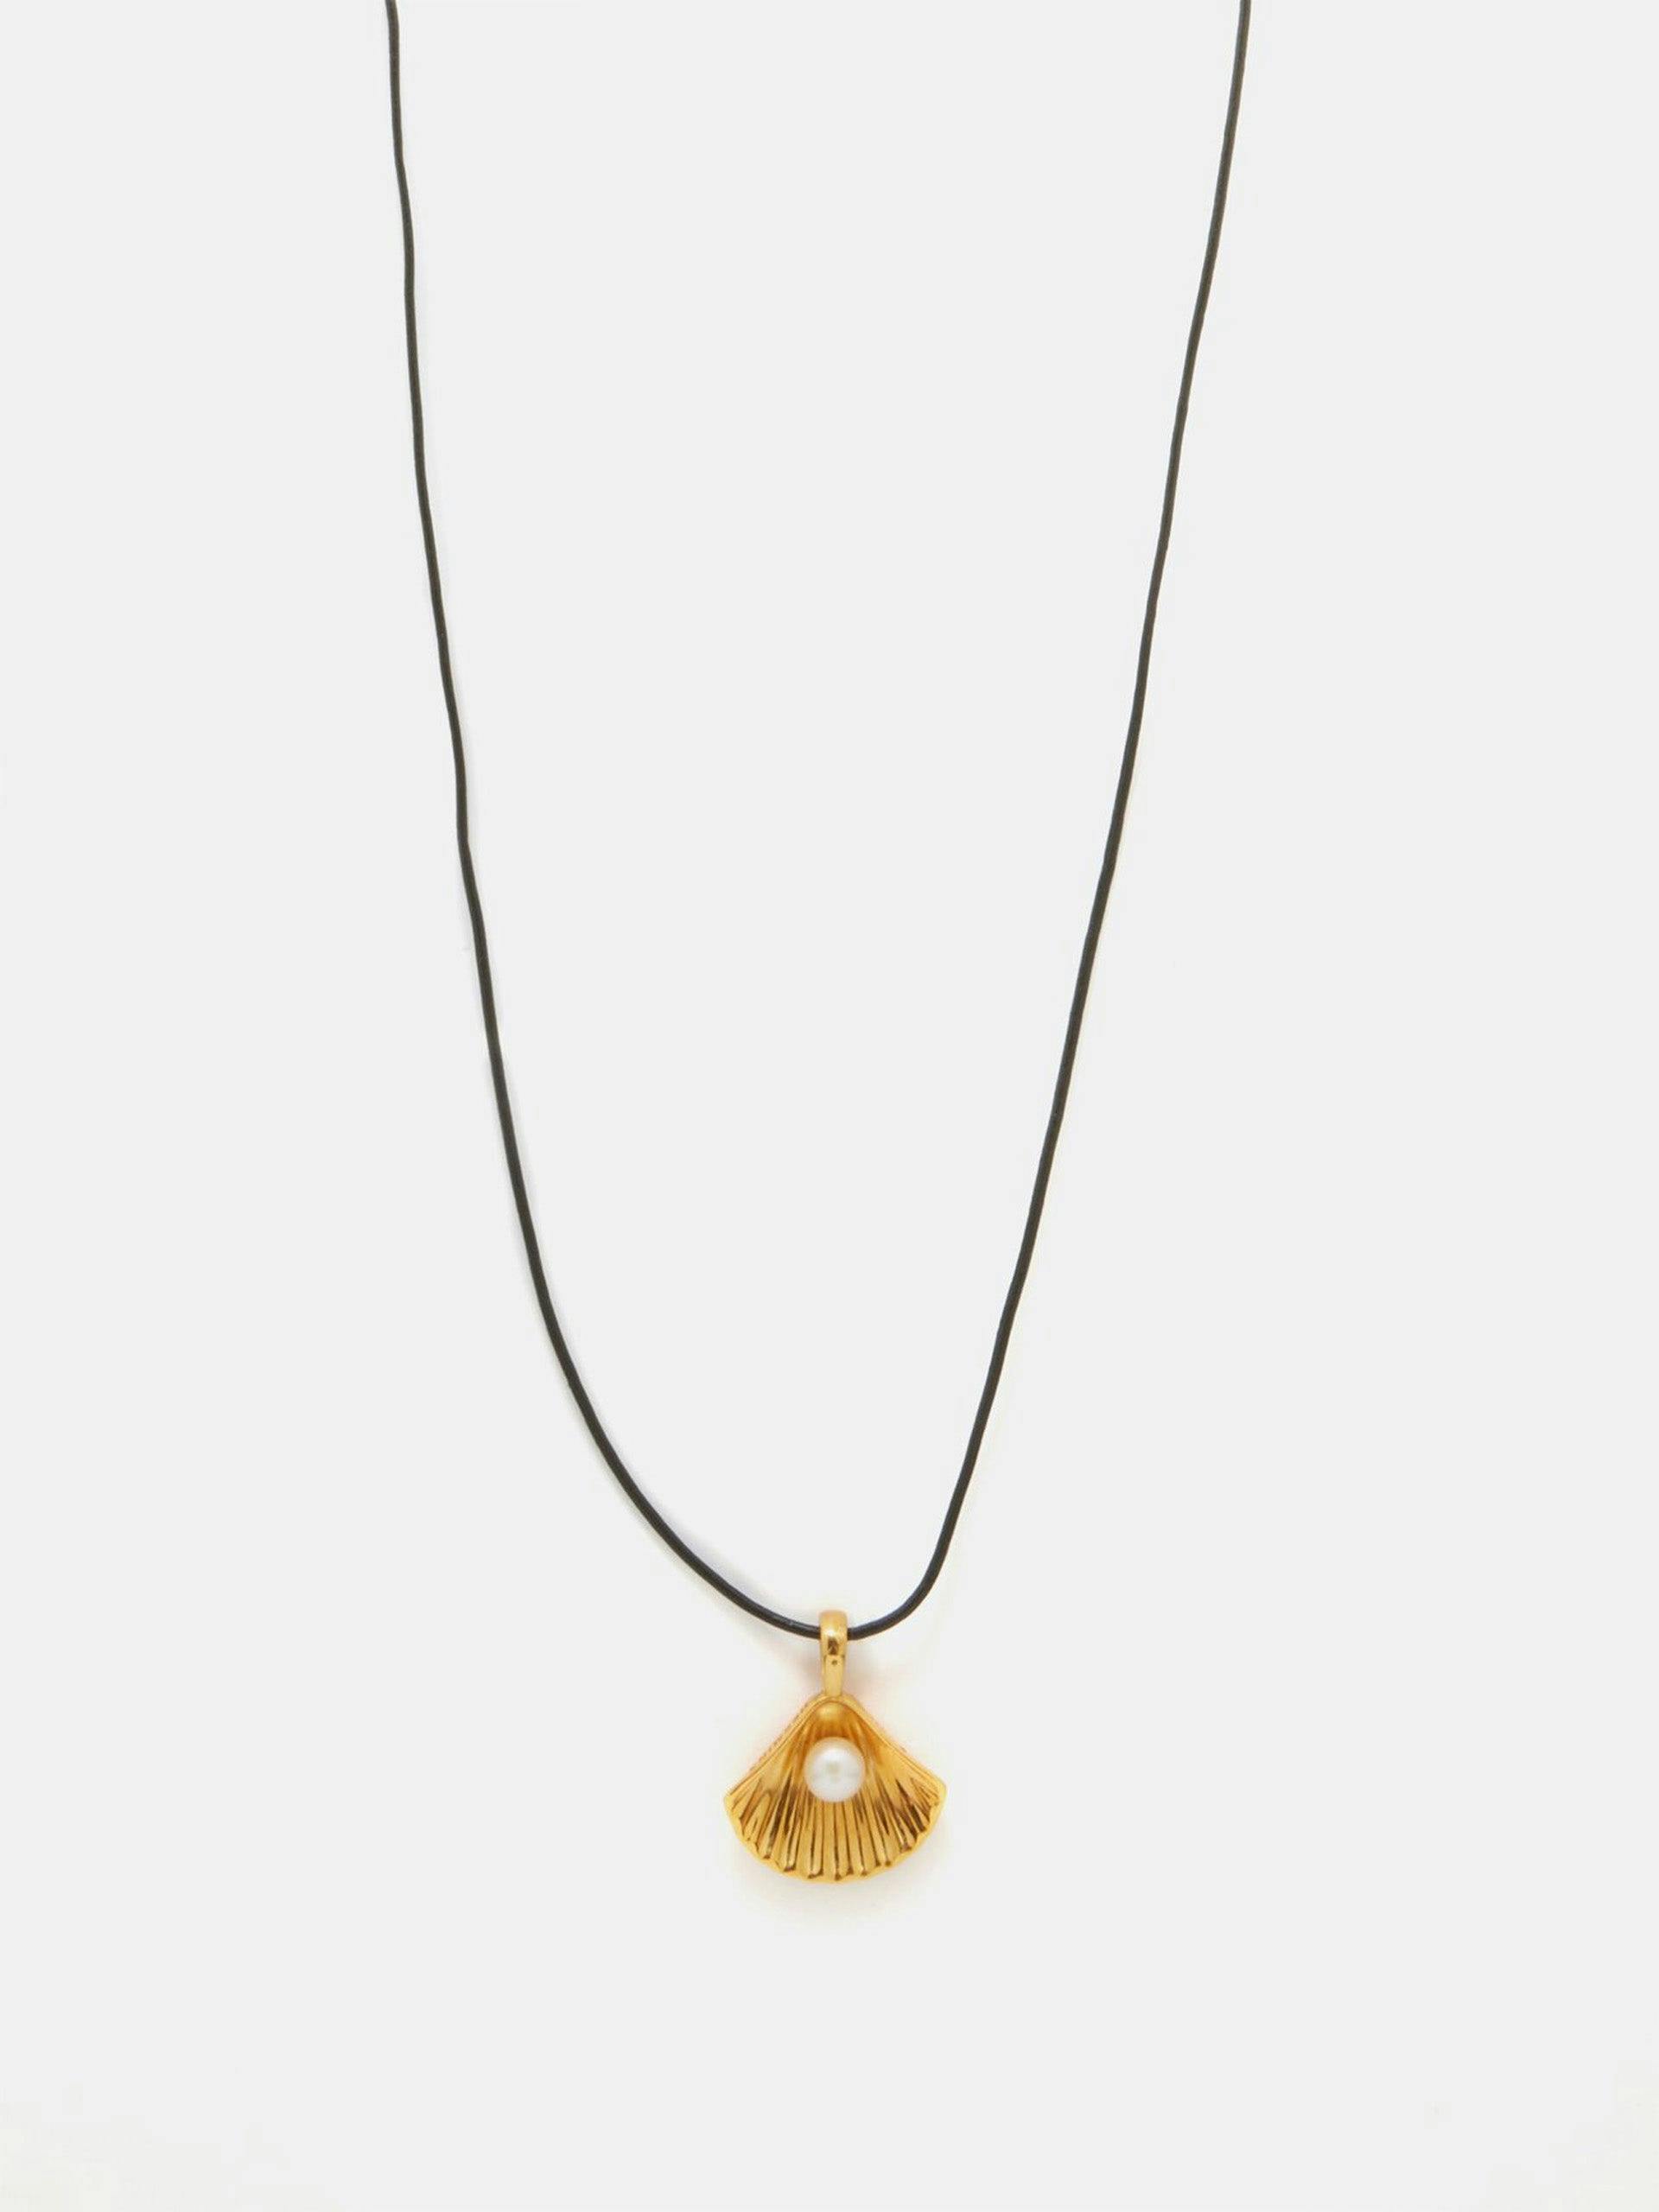 Kochyli leather and gold-vermeil necklace